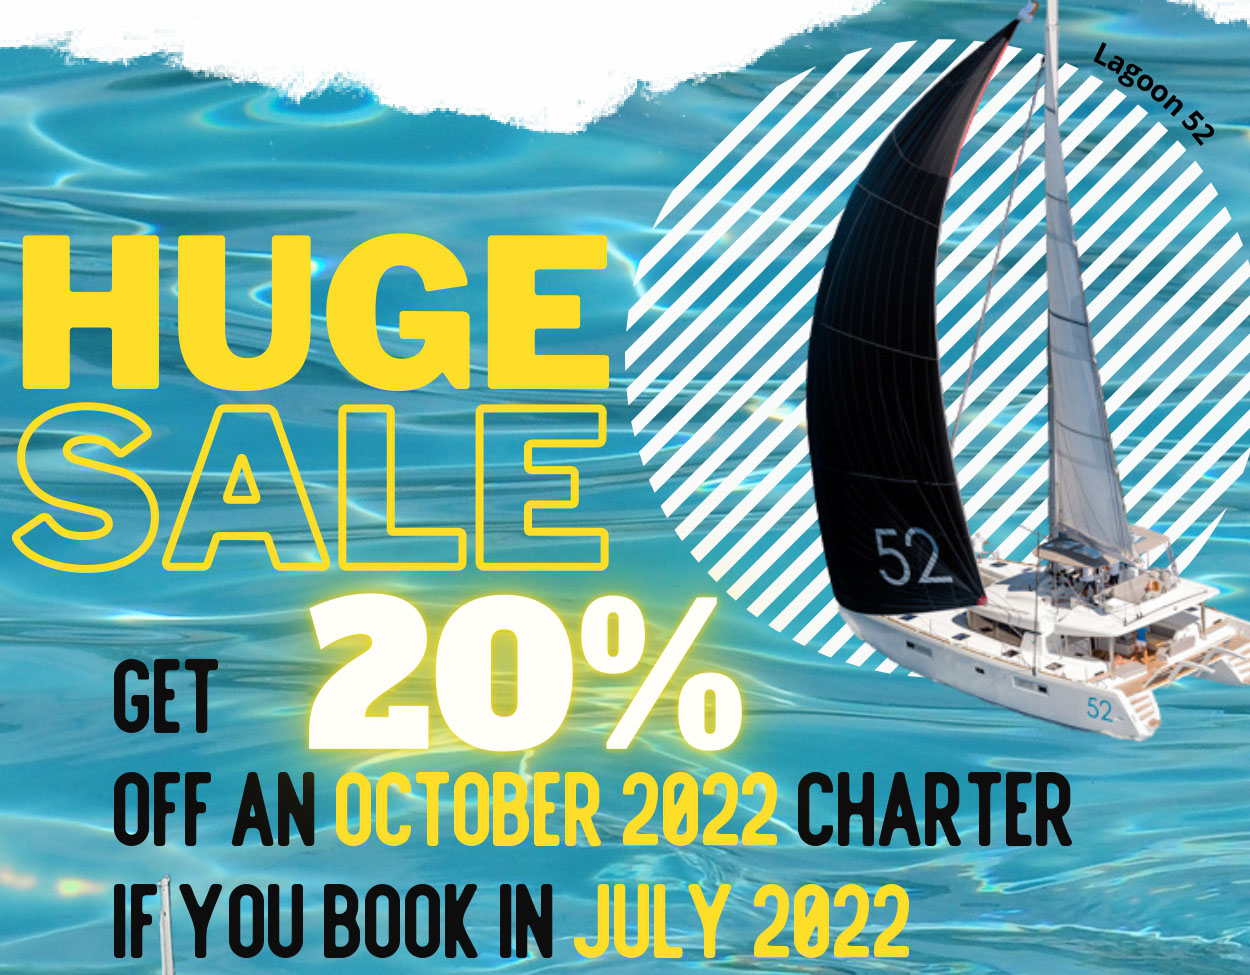 Special offer  20% off an October 2022 Charter